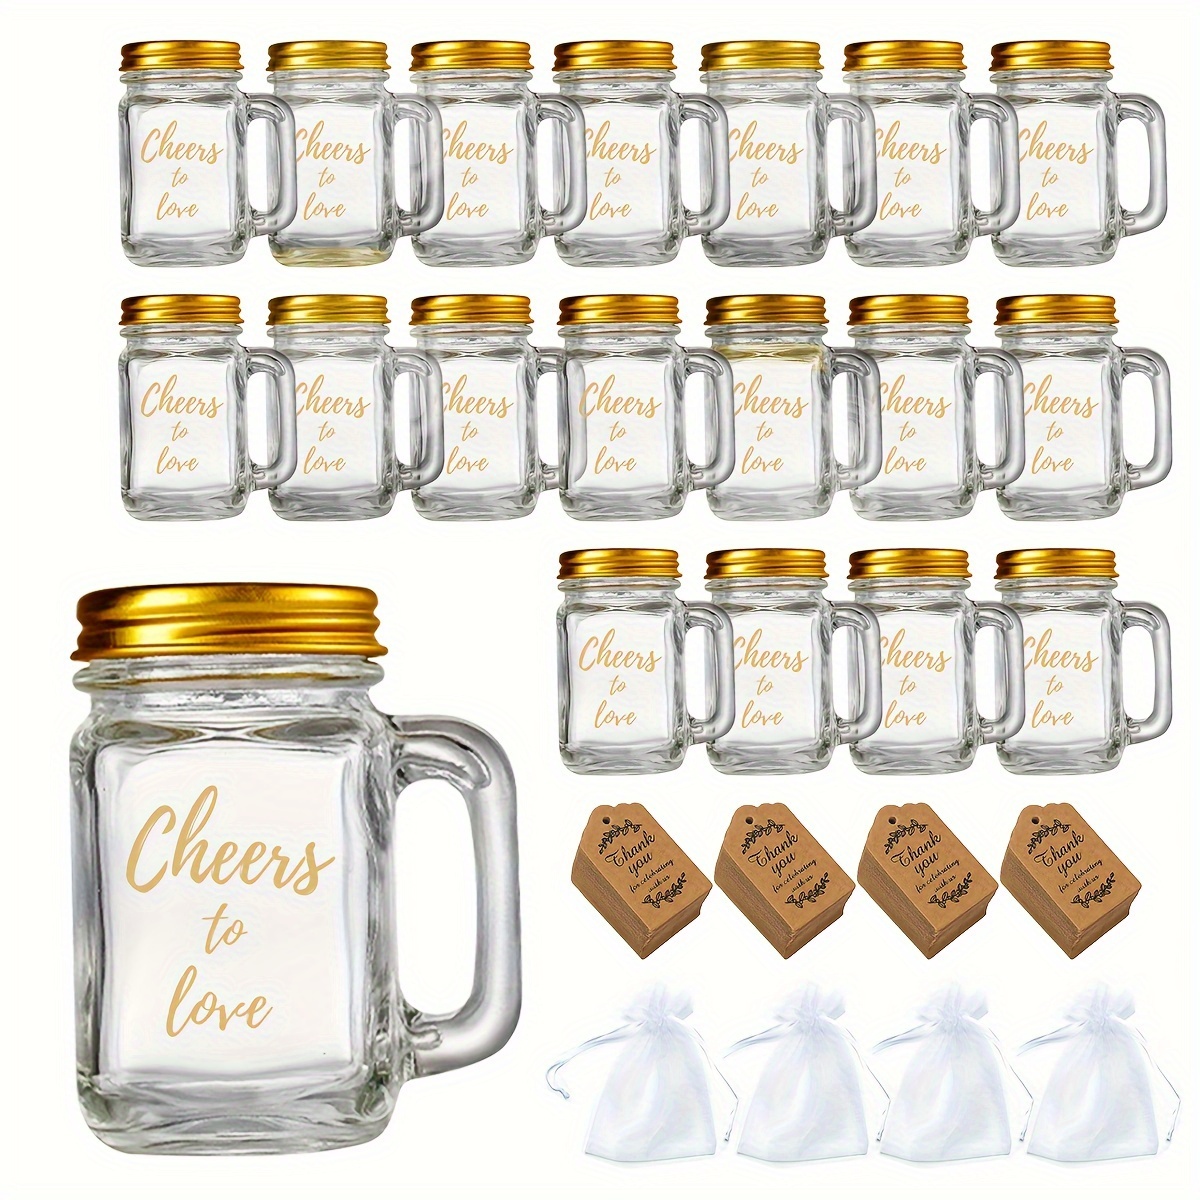 

50set, Wedding Favors For Guests Bulk Glasses, Cheers To Love Mini Mason Jar 35ml With 50 Thank You Cards & Organza Bags For Guest Wedding Newlyweds Bridal Shower Gifts